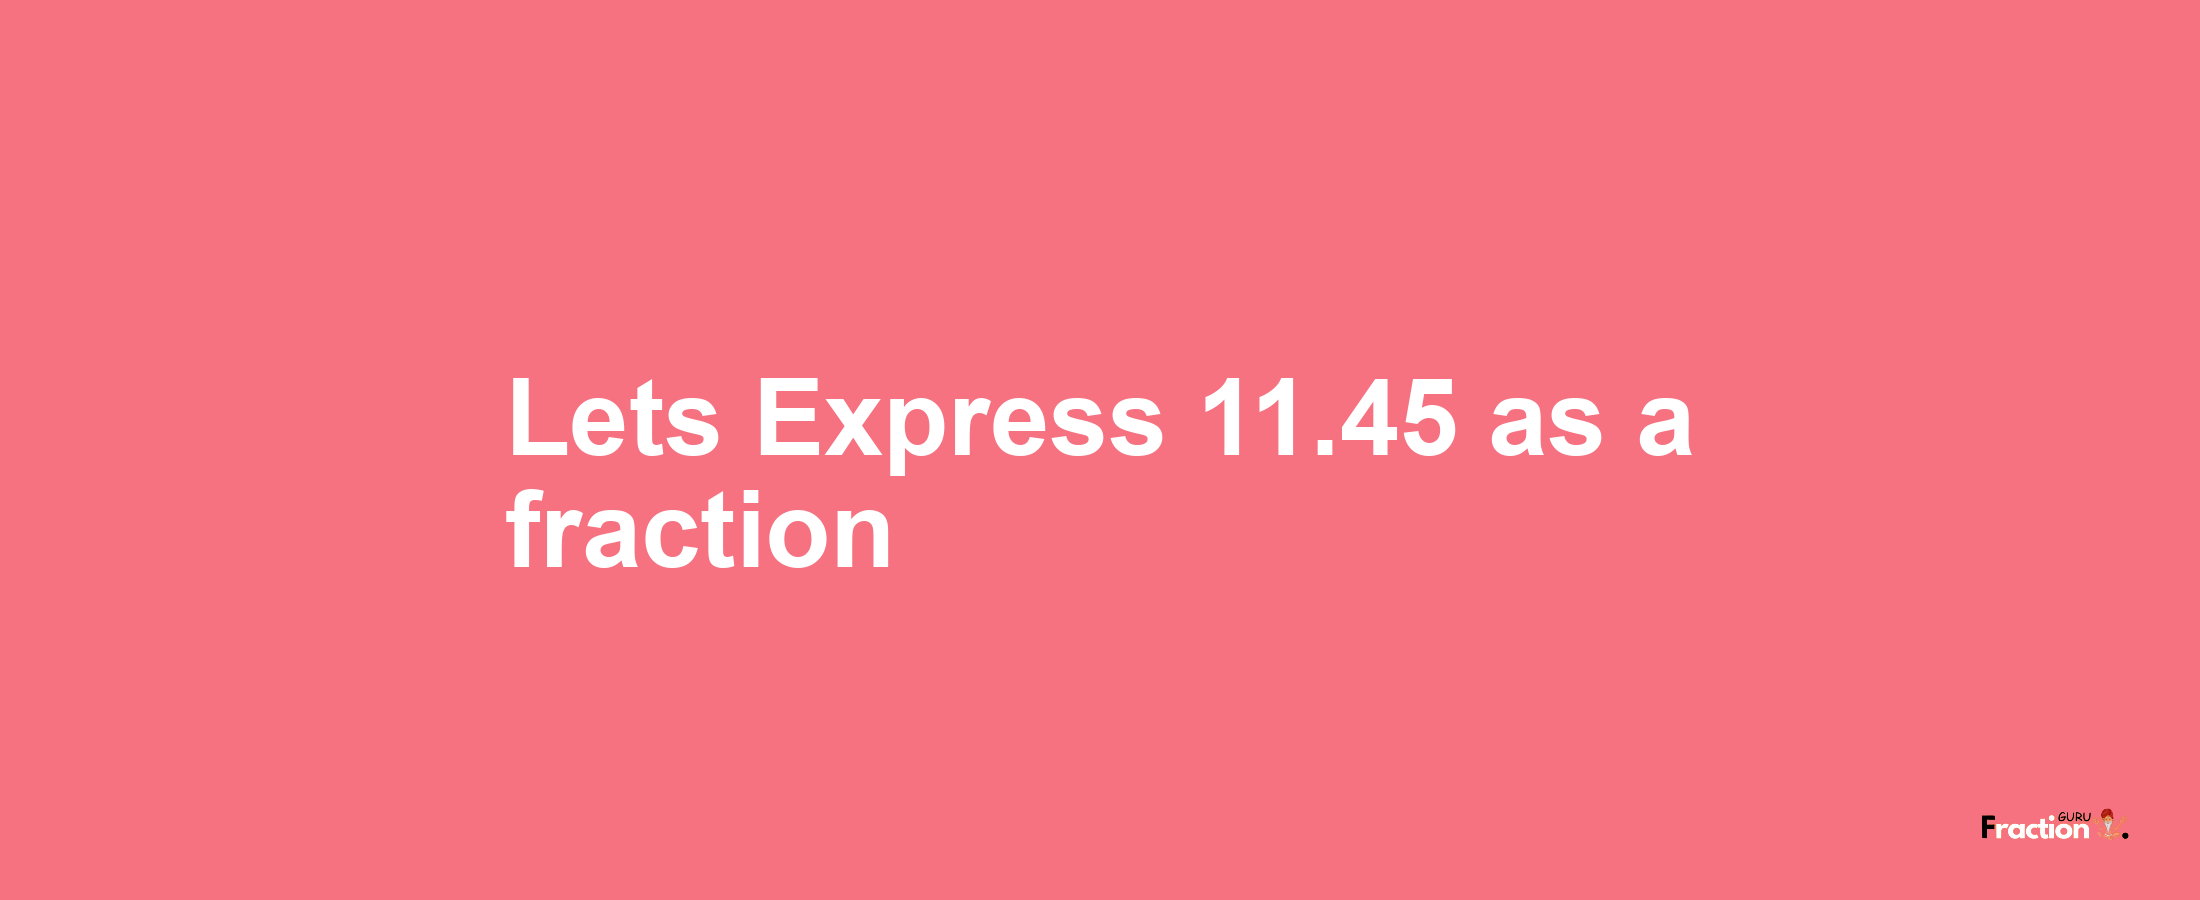 Lets Express 11.45 as afraction